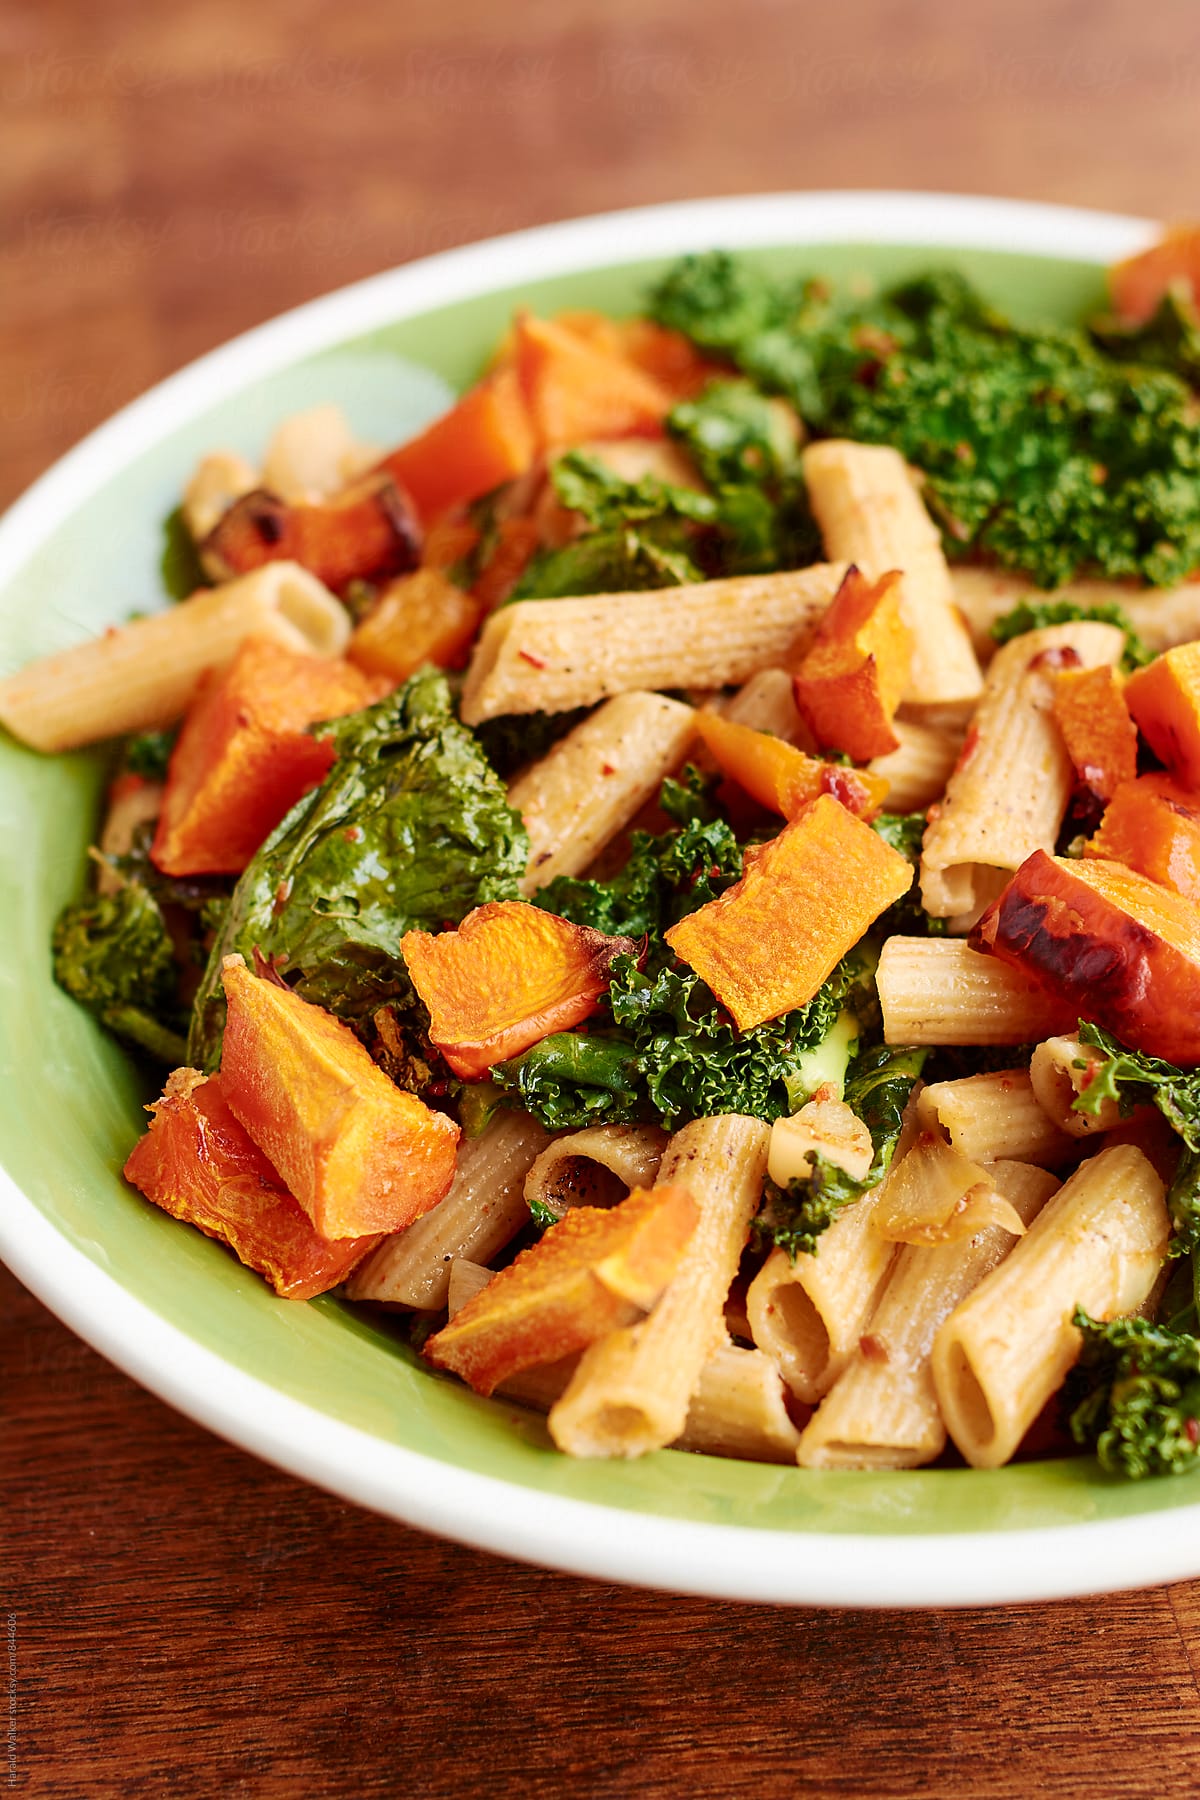 Wholewheat Pasta with Kale and Squash